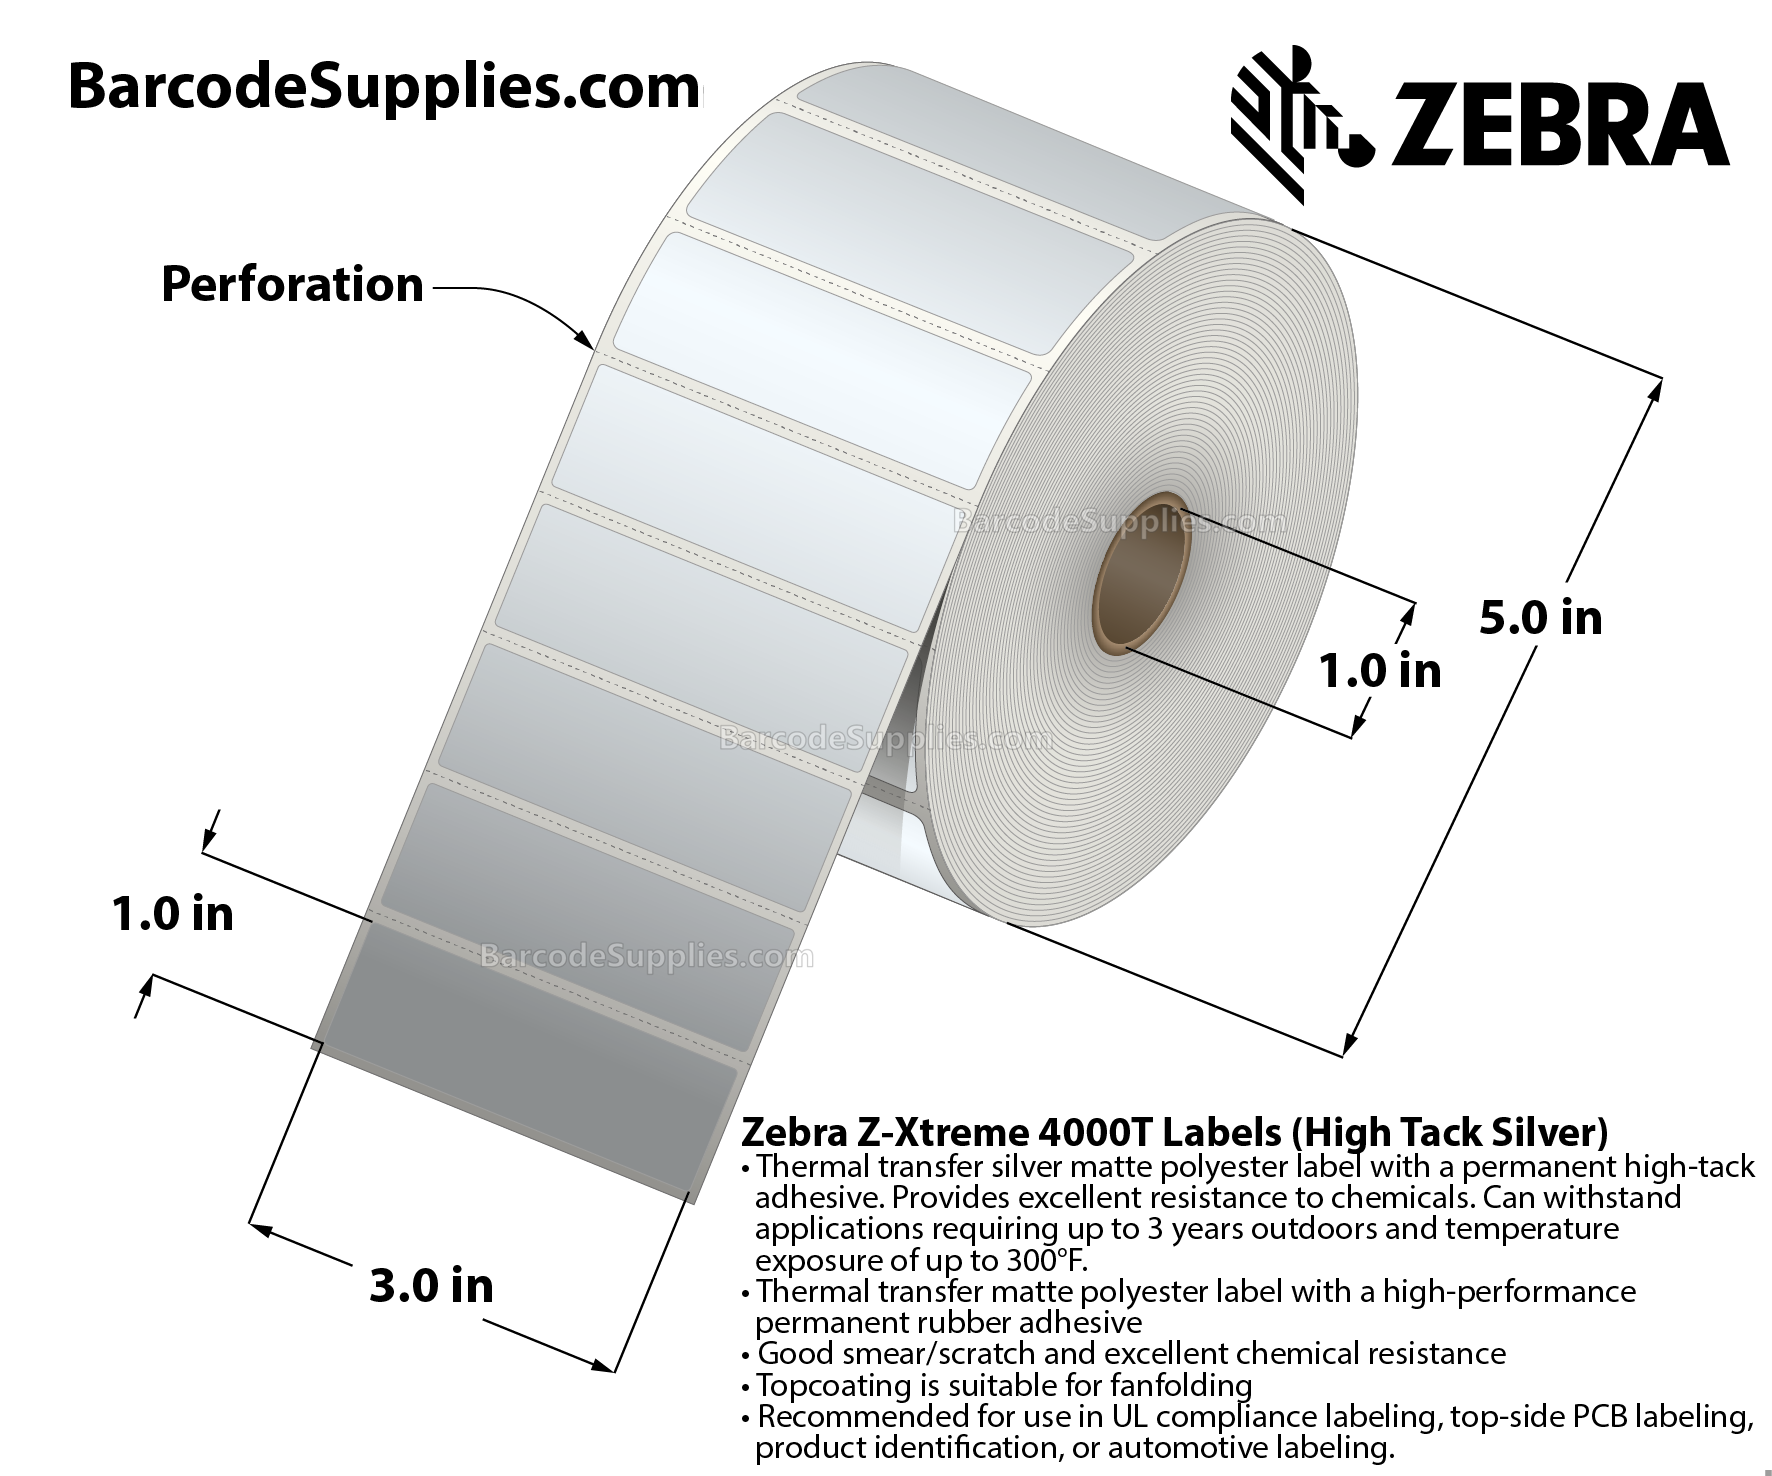 3 x 1 Thermal Transfer Silver Z-Xtreme 4000T High-Tack Silver Labels With High-tack Adhesive - Perforated - 1500 Labels Per Roll - Carton Of 1 Rolls - 1500 Labels Total - MPN: 10023178